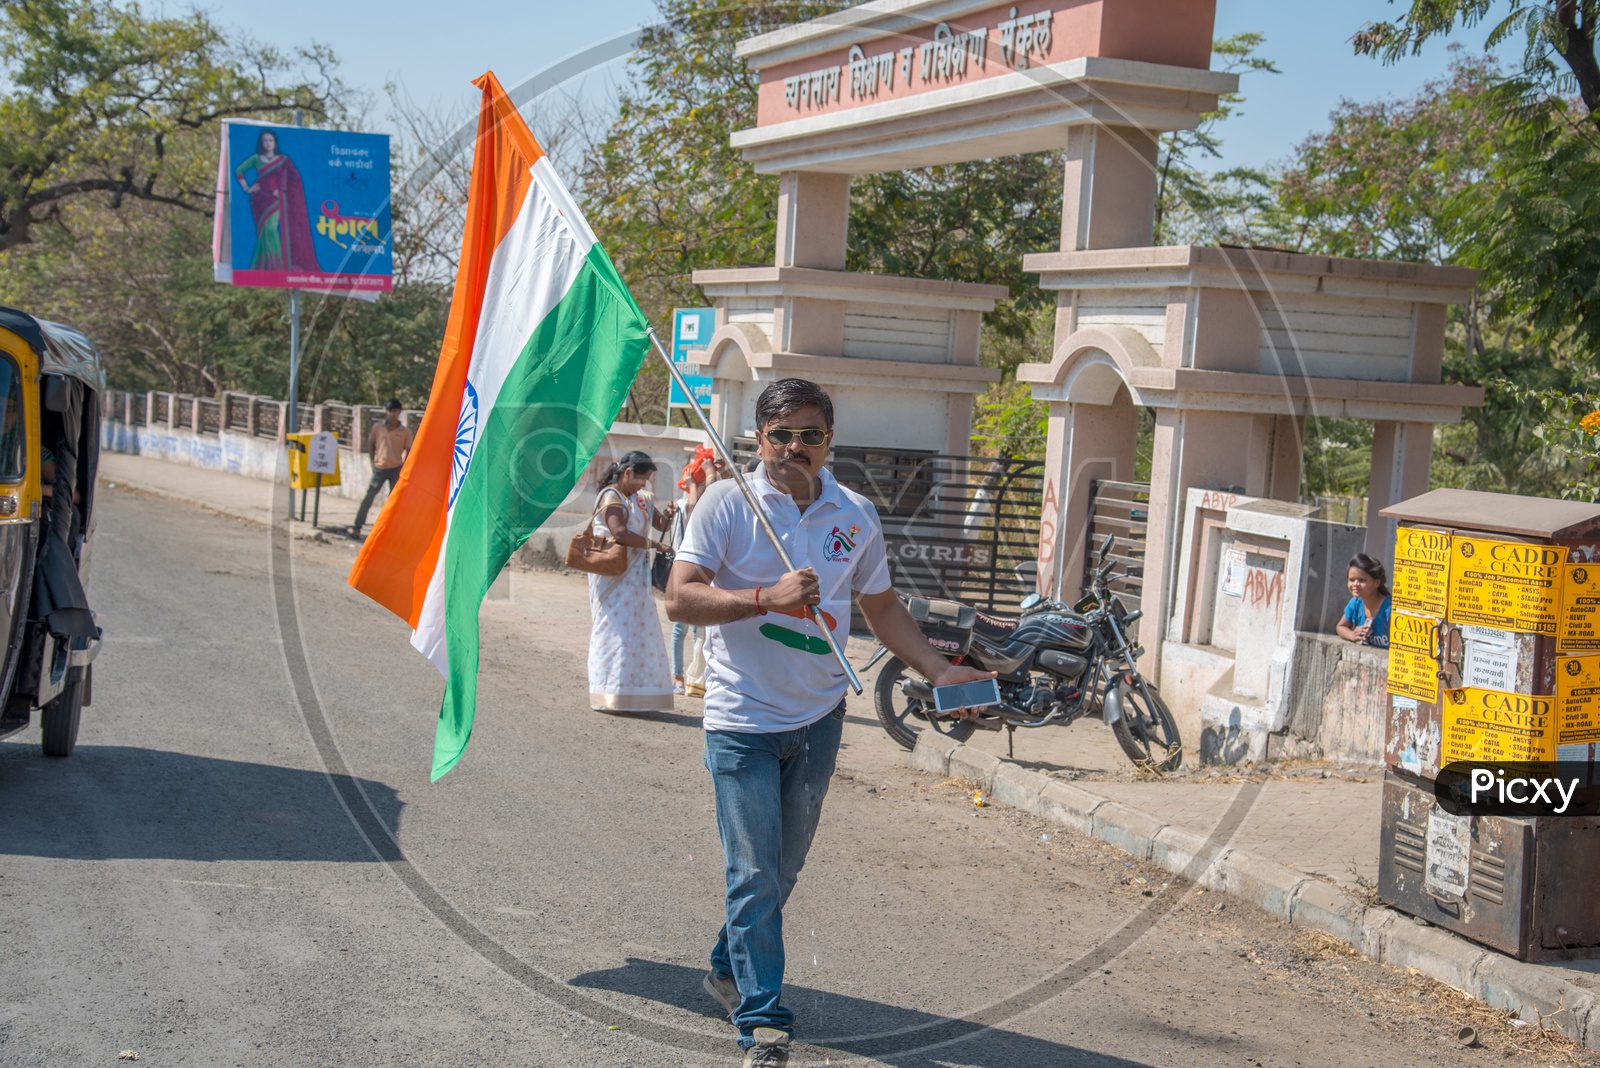 Indian  People Carrying Indian National Flags In a Road Rally On The Occasion Of Republic Day